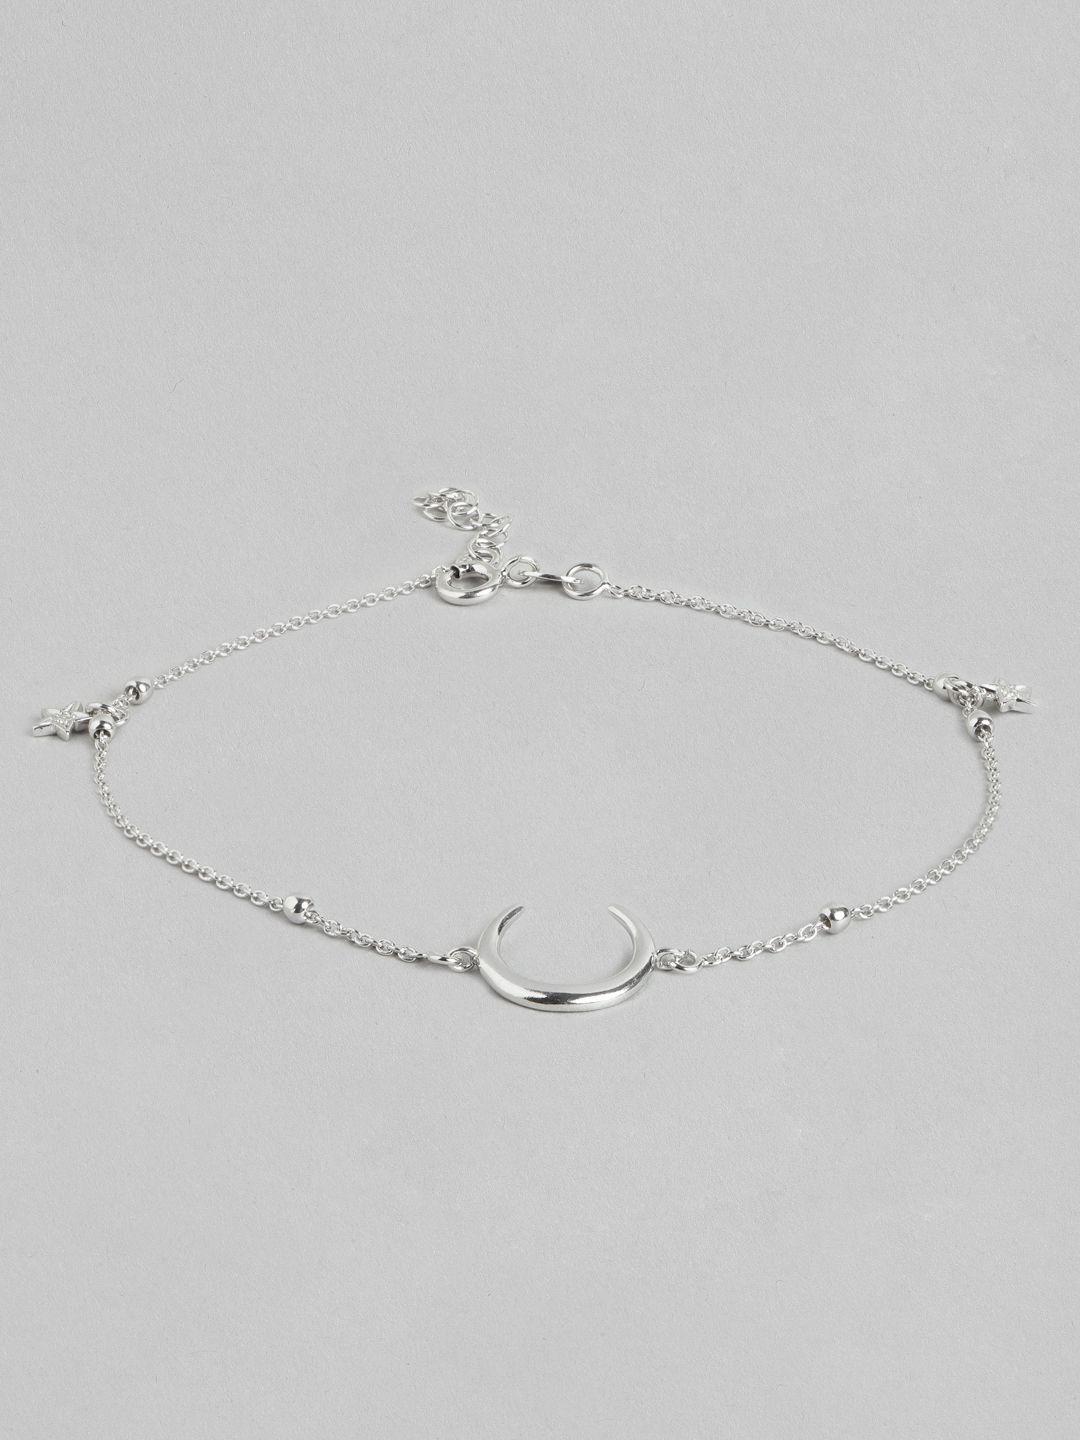 carlton-london-925-sterling-silver-moon-rhodium-plated-adjustable-charm-anklet